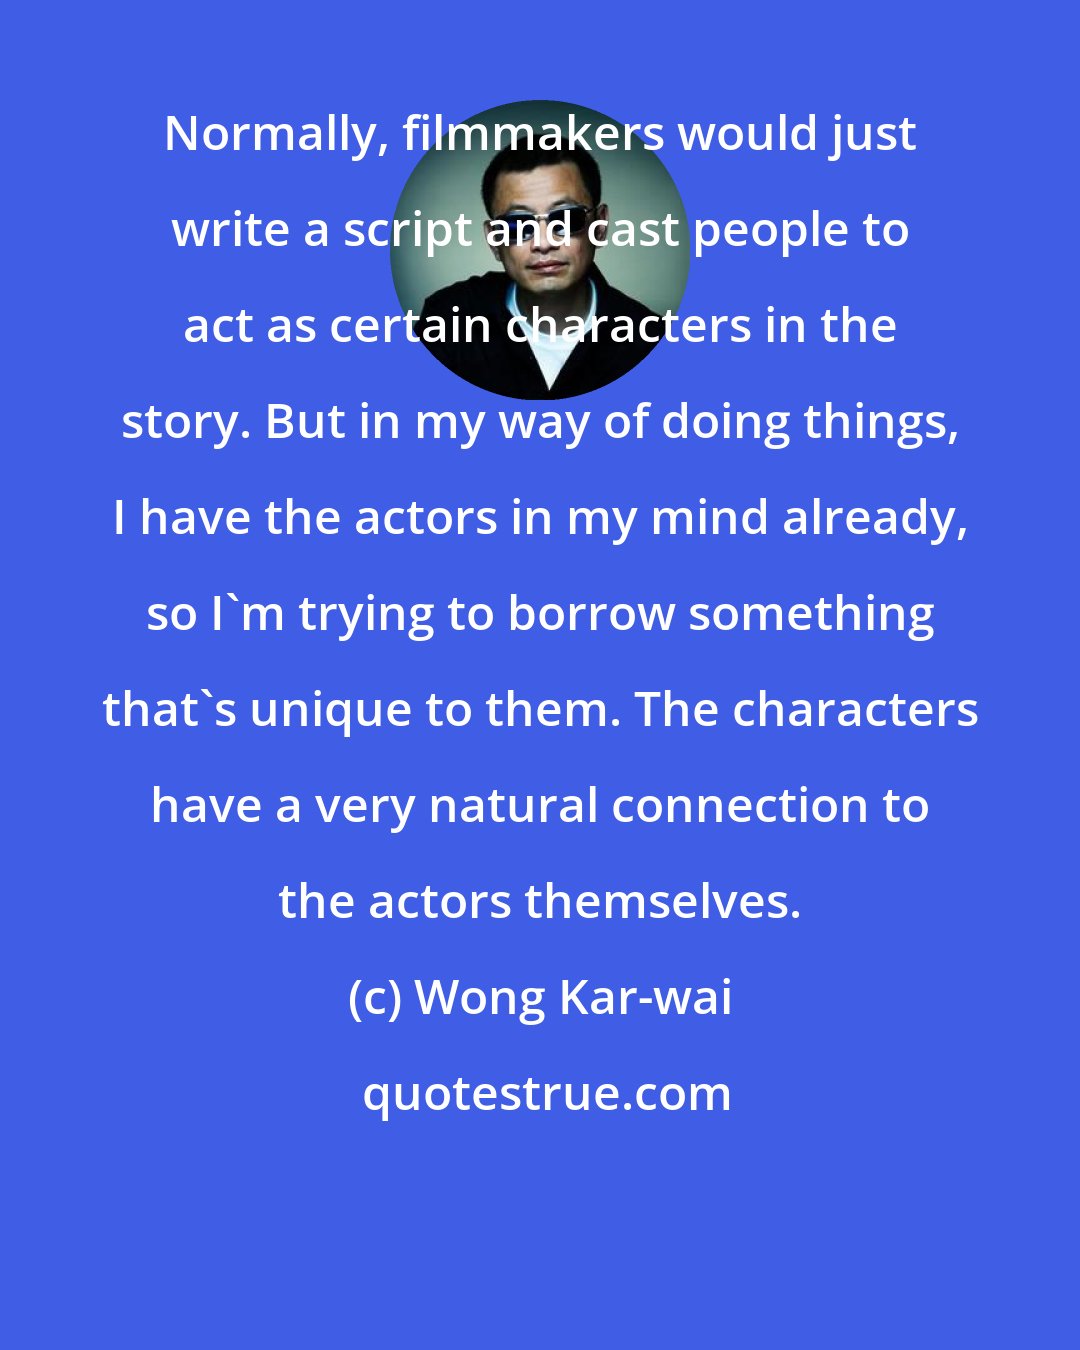 Wong Kar-wai: Normally, filmmakers would just write a script and cast people to act as certain characters in the story. But in my way of doing things, I have the actors in my mind already, so I'm trying to borrow something that's unique to them. The characters have a very natural connection to the actors themselves.